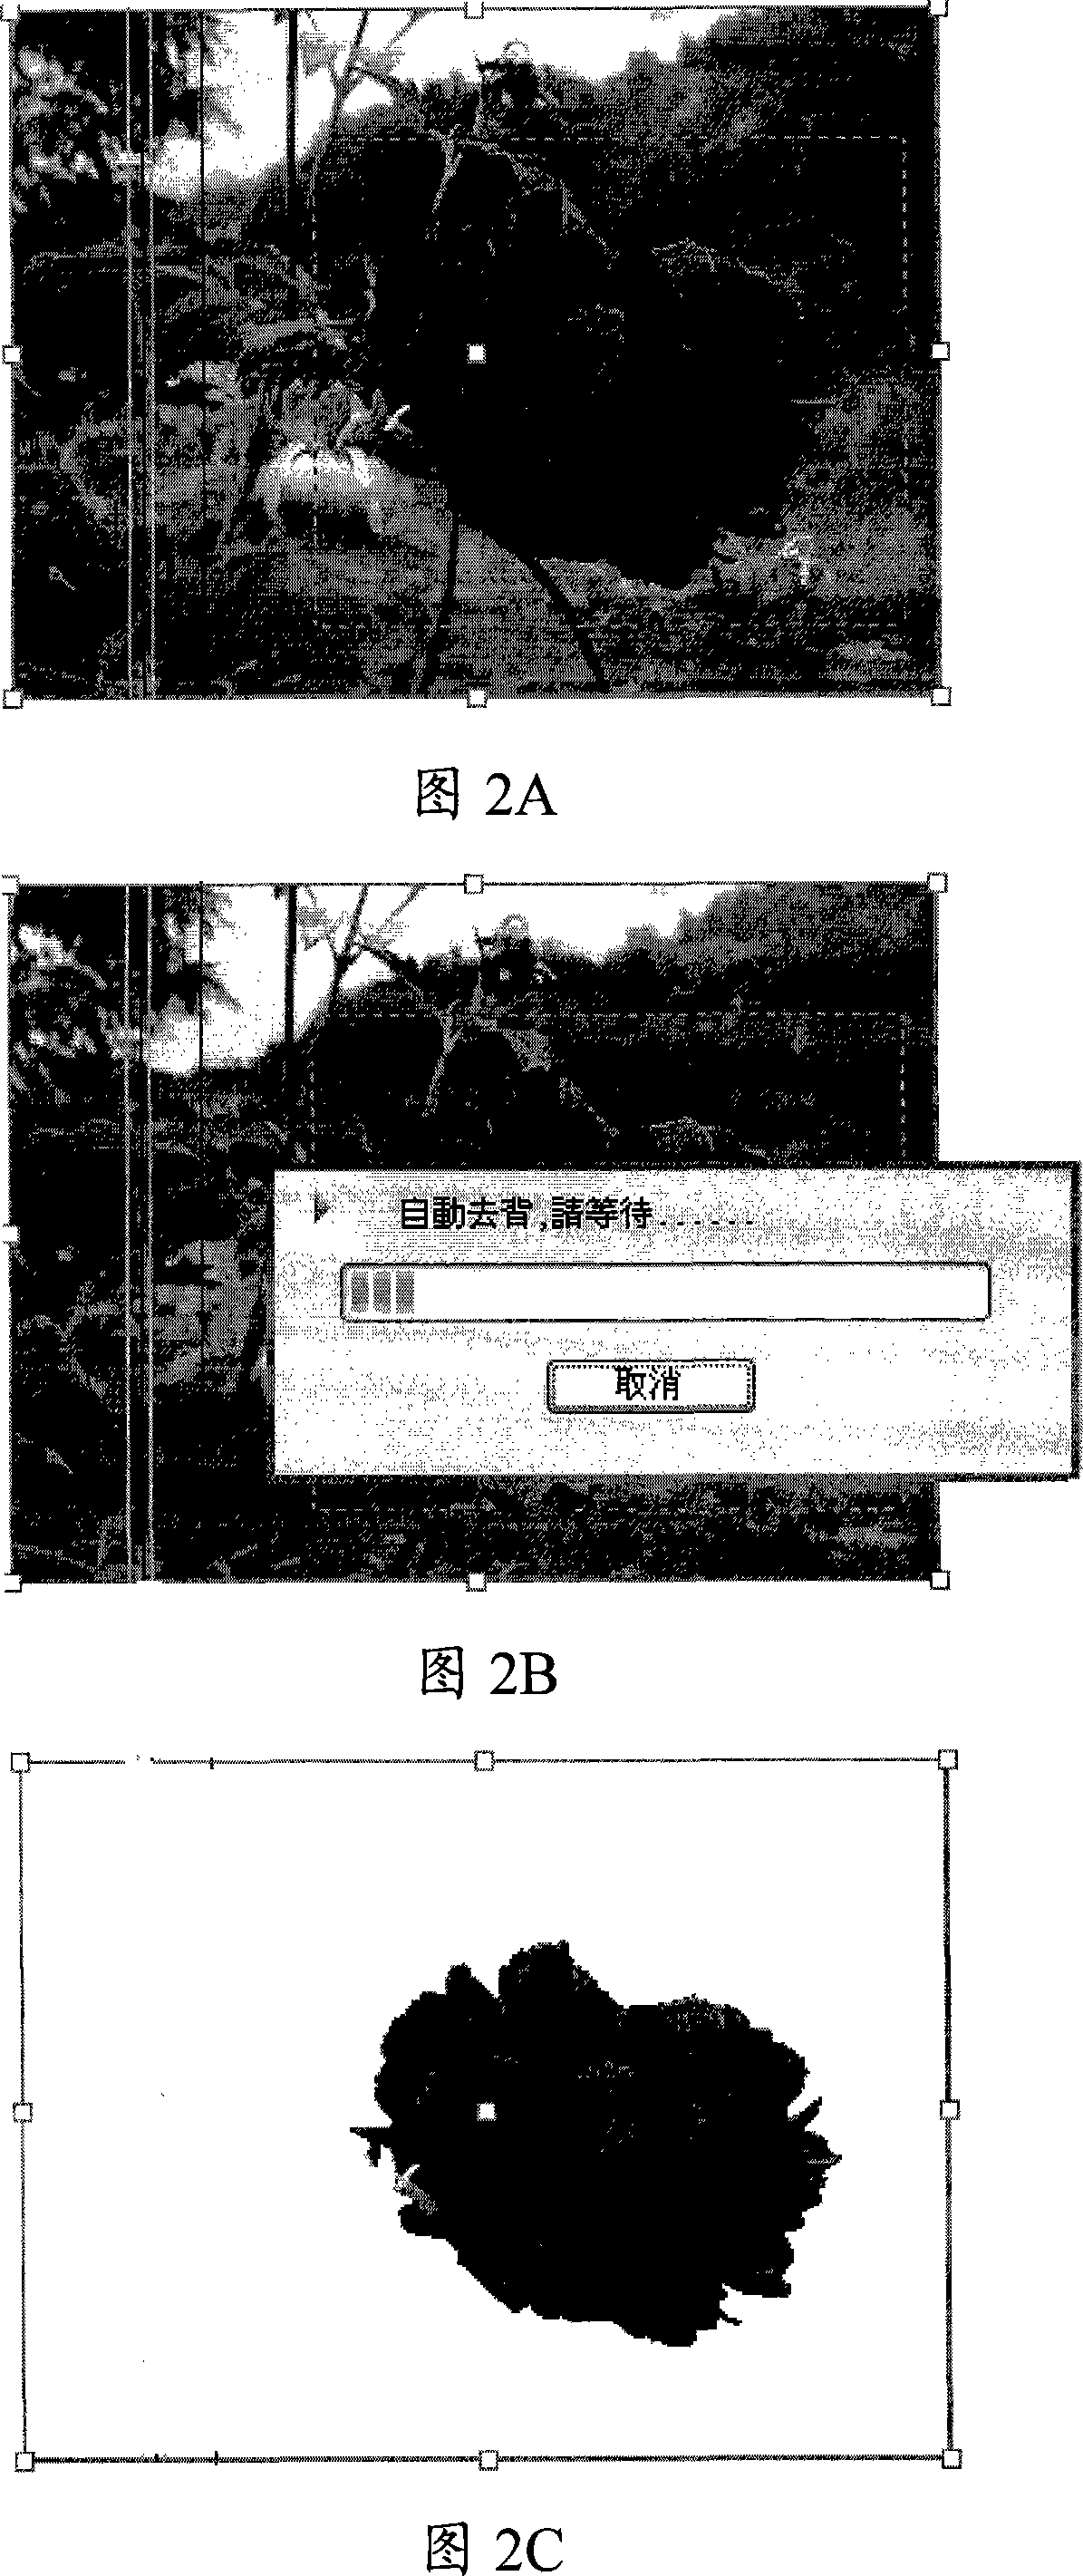 An automatic land return method and device in typeset